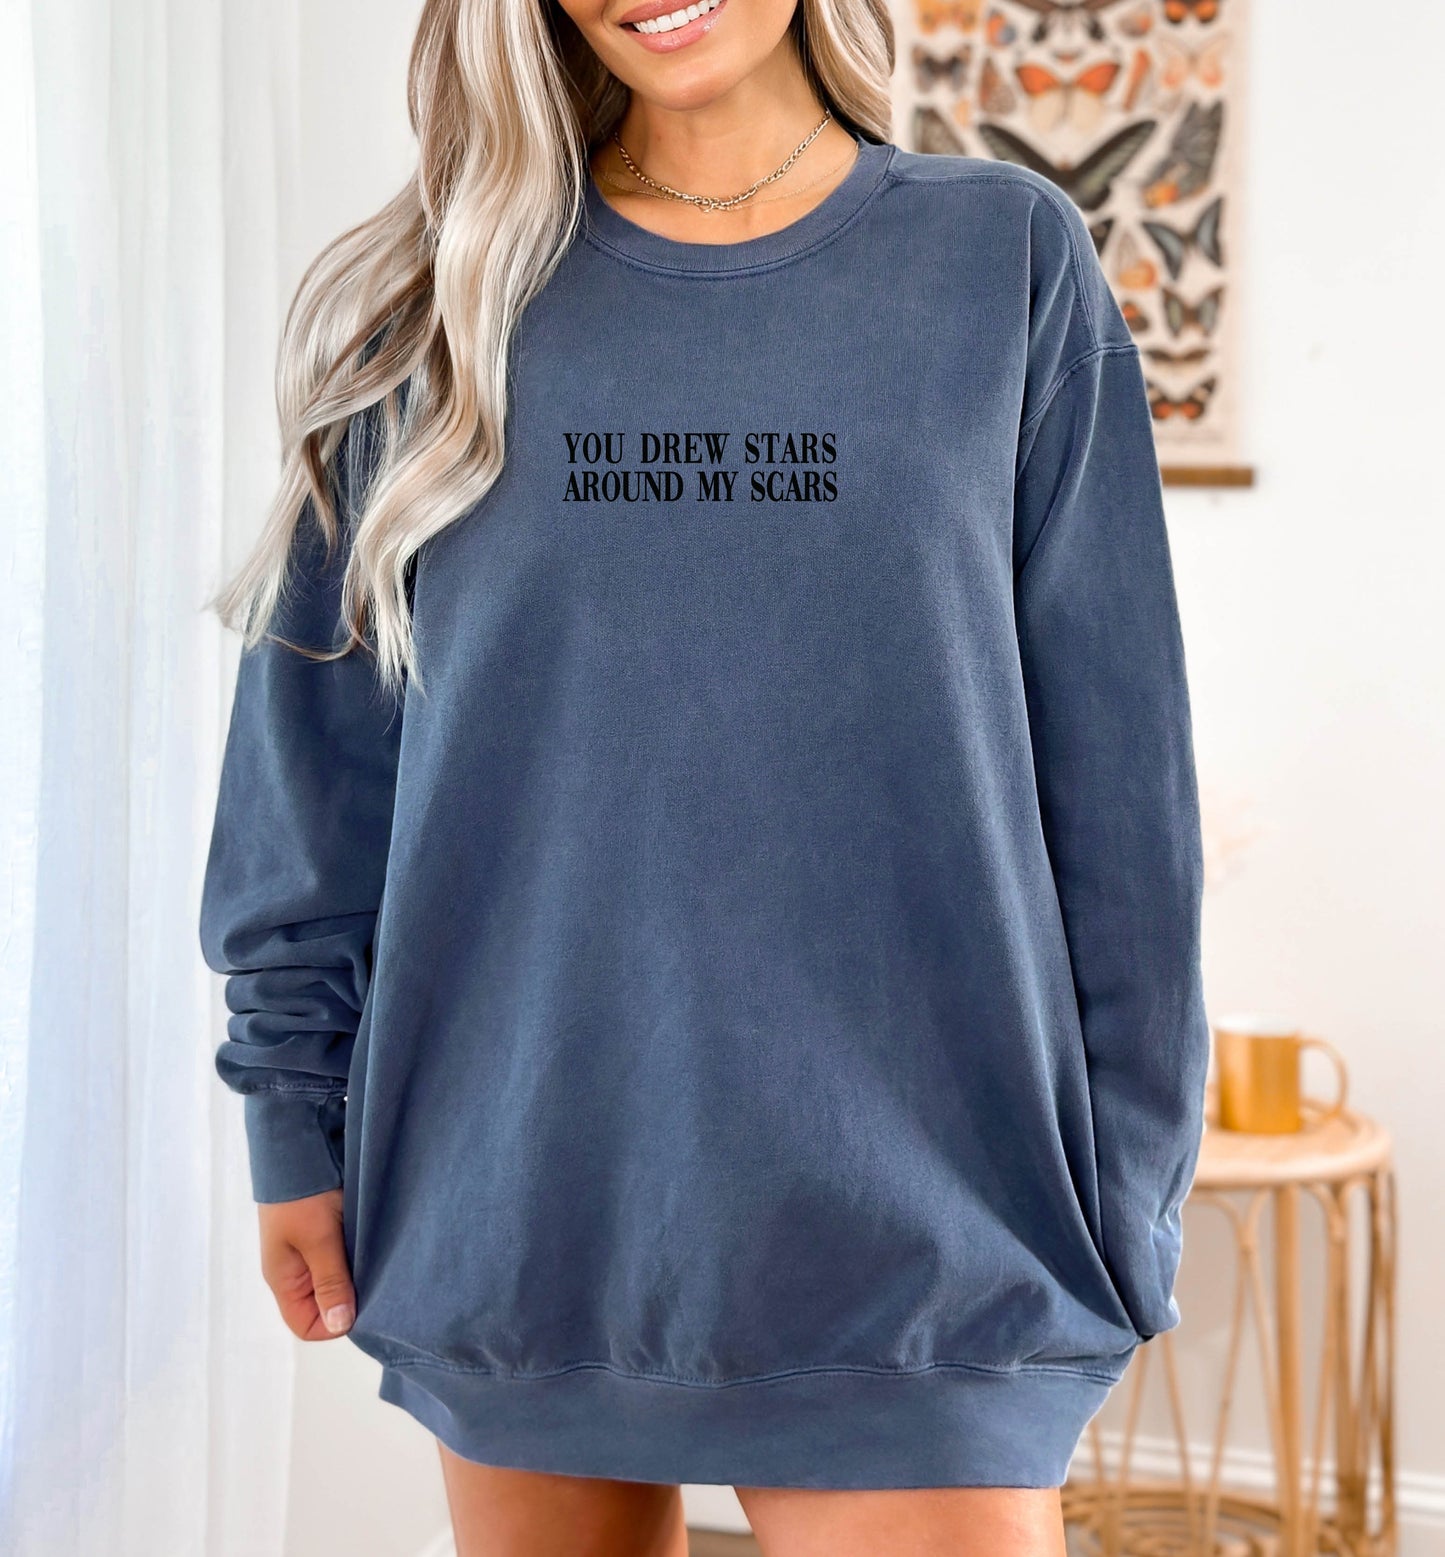 Taylor Swift Quotes Crewneck Sweater